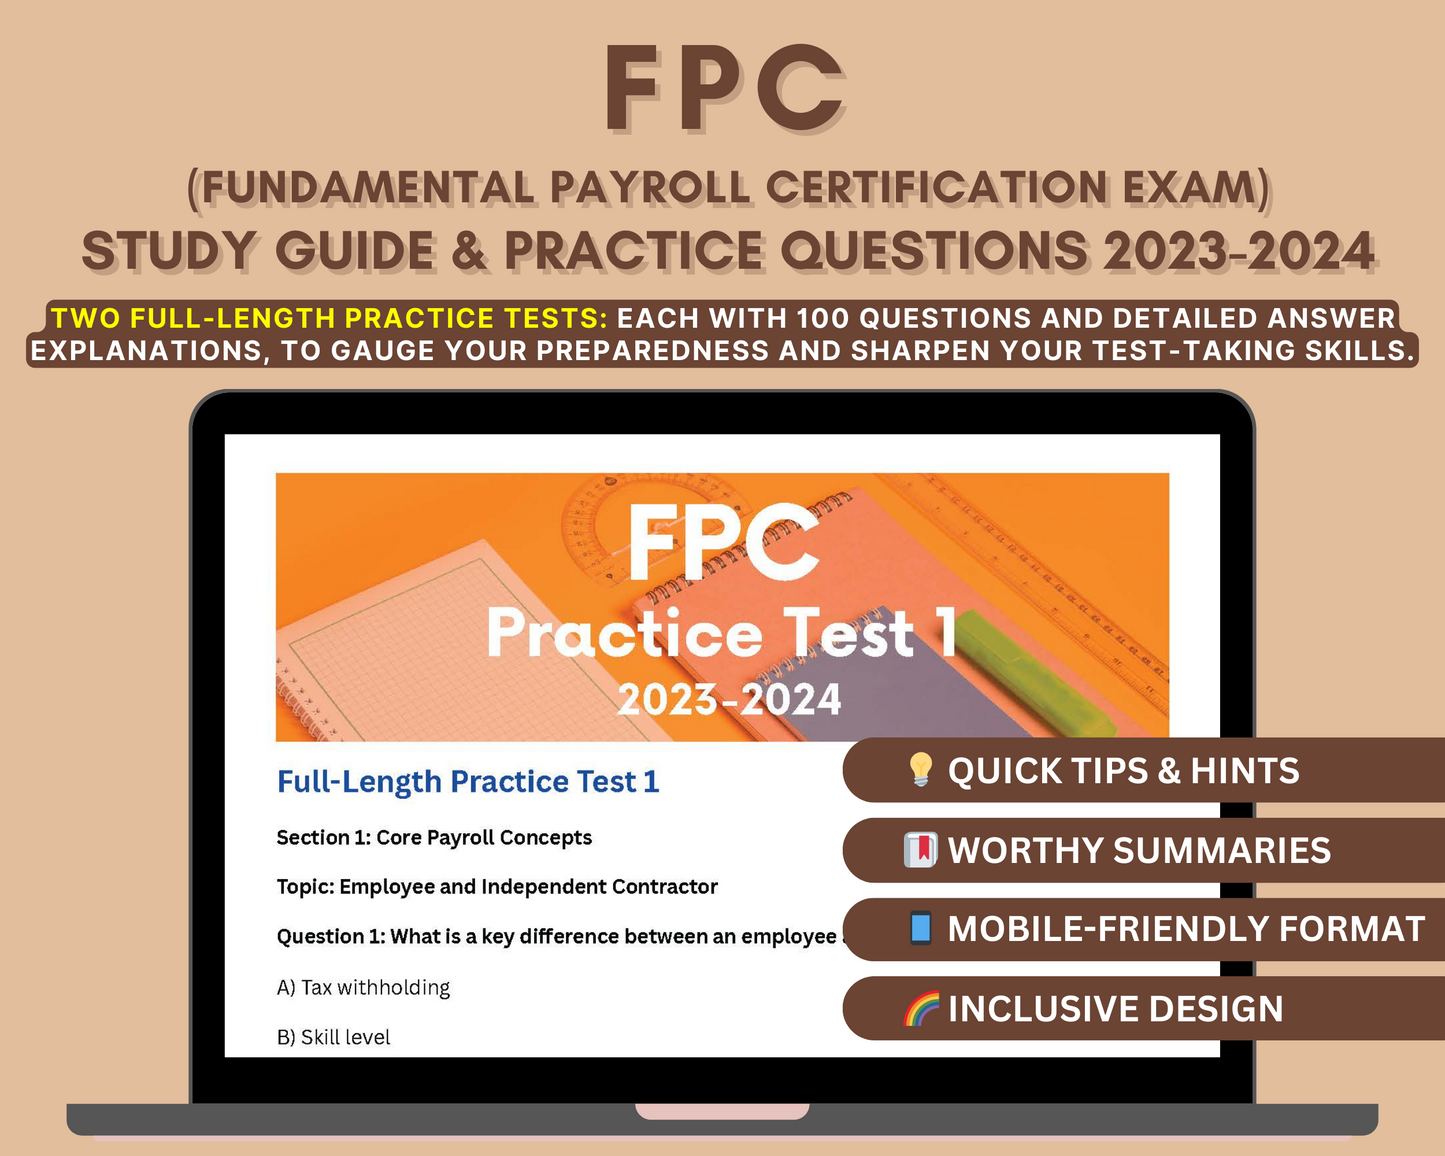 FPC Exam Study Guide 2023-2024: In-Depth Content Review, Practice Test & Exam Tips for Fundamental Payroll Certification